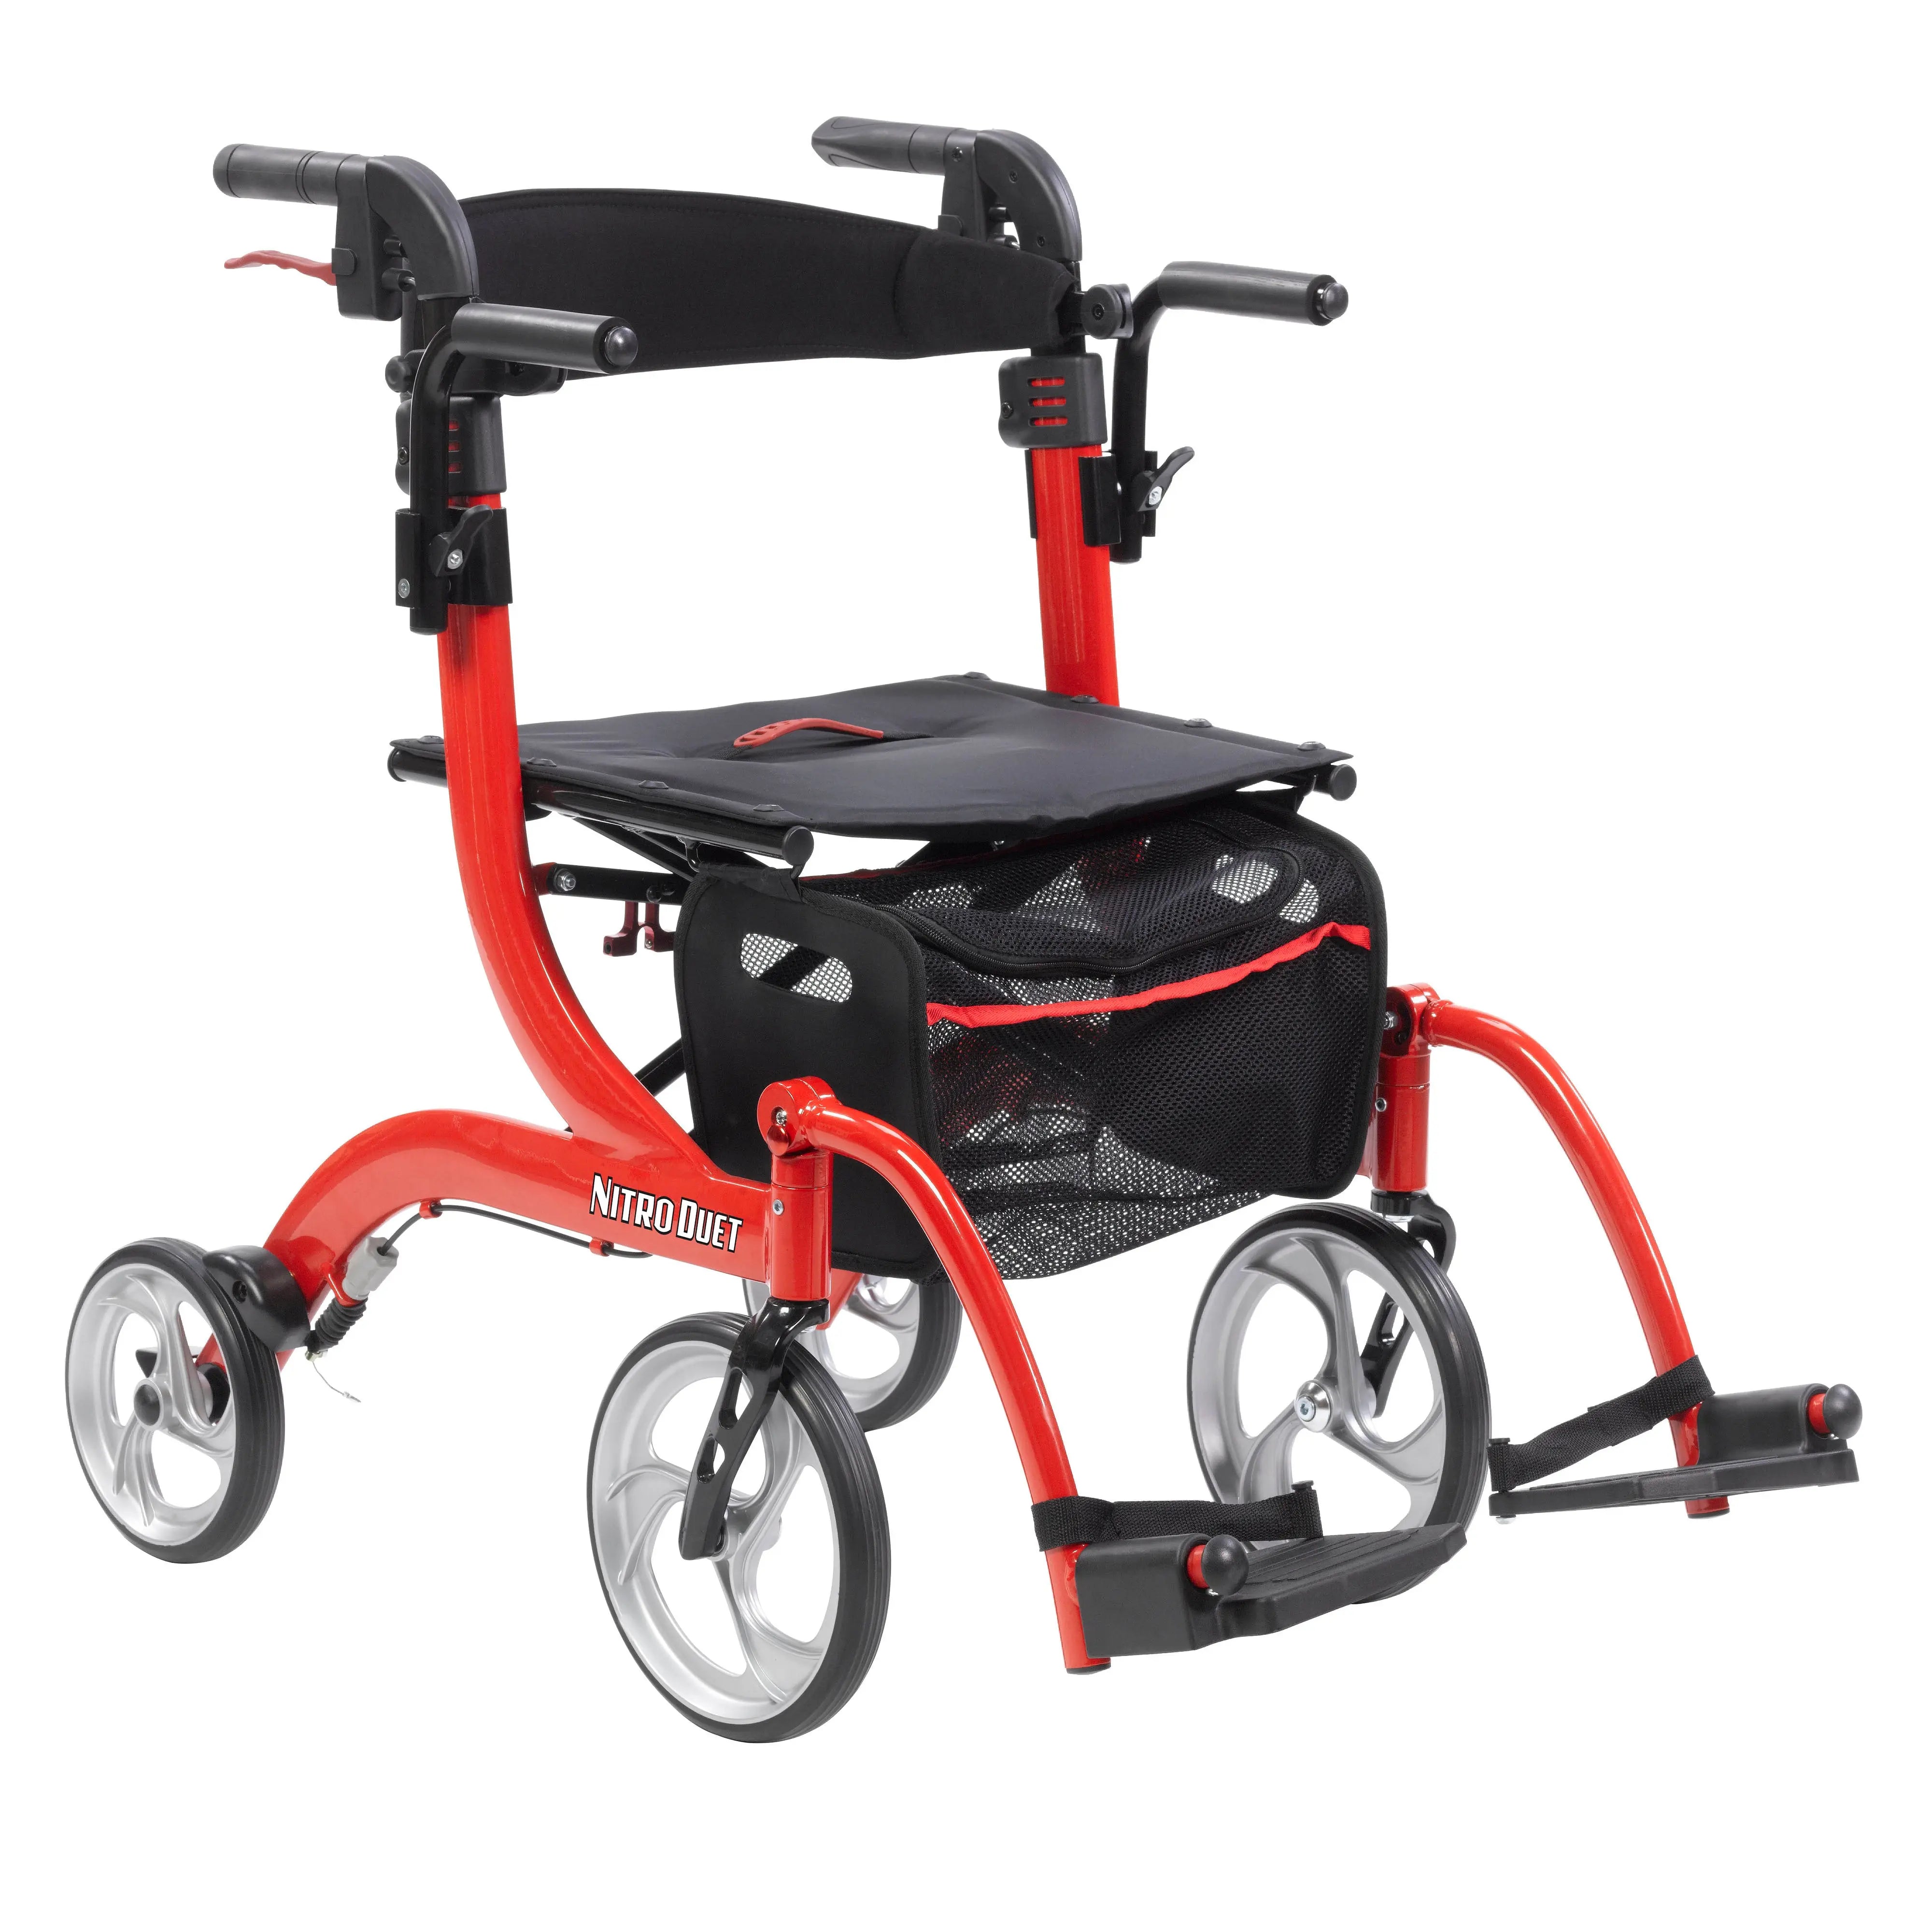 Nitro Duet Dual Function Transport Wheelchair and Rollator Rolling Walker, Red - Home Health Store Inc